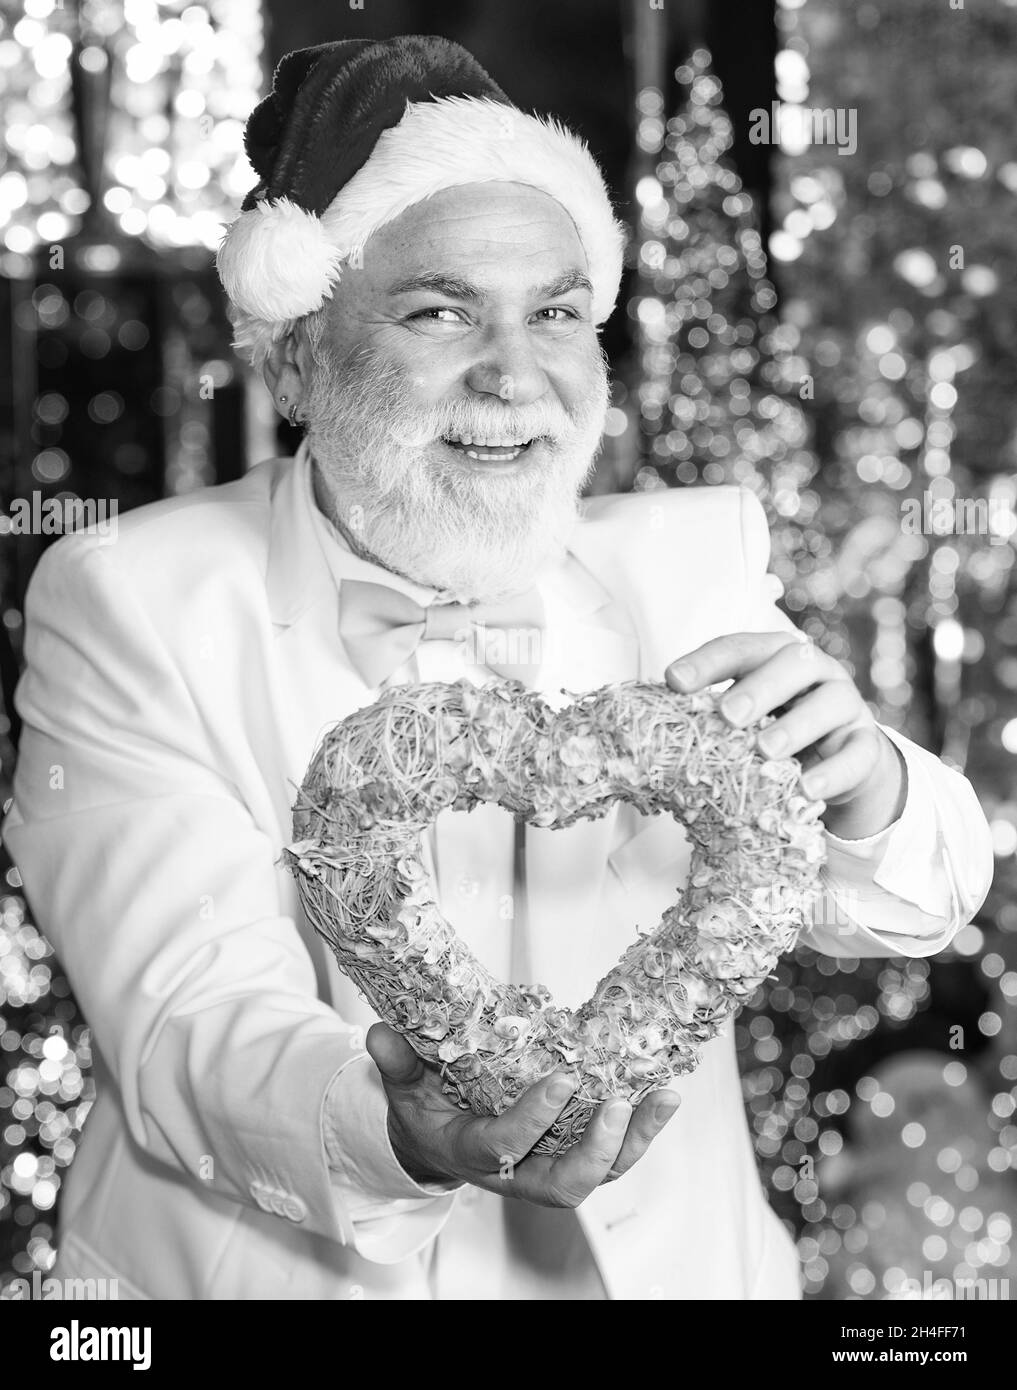 Charity and kindness. Santa Claus. Mature man with white beard. Christmas eve. Lovely greetings. Senior man celebrate christmas. Kind grandpa with Stock Photo